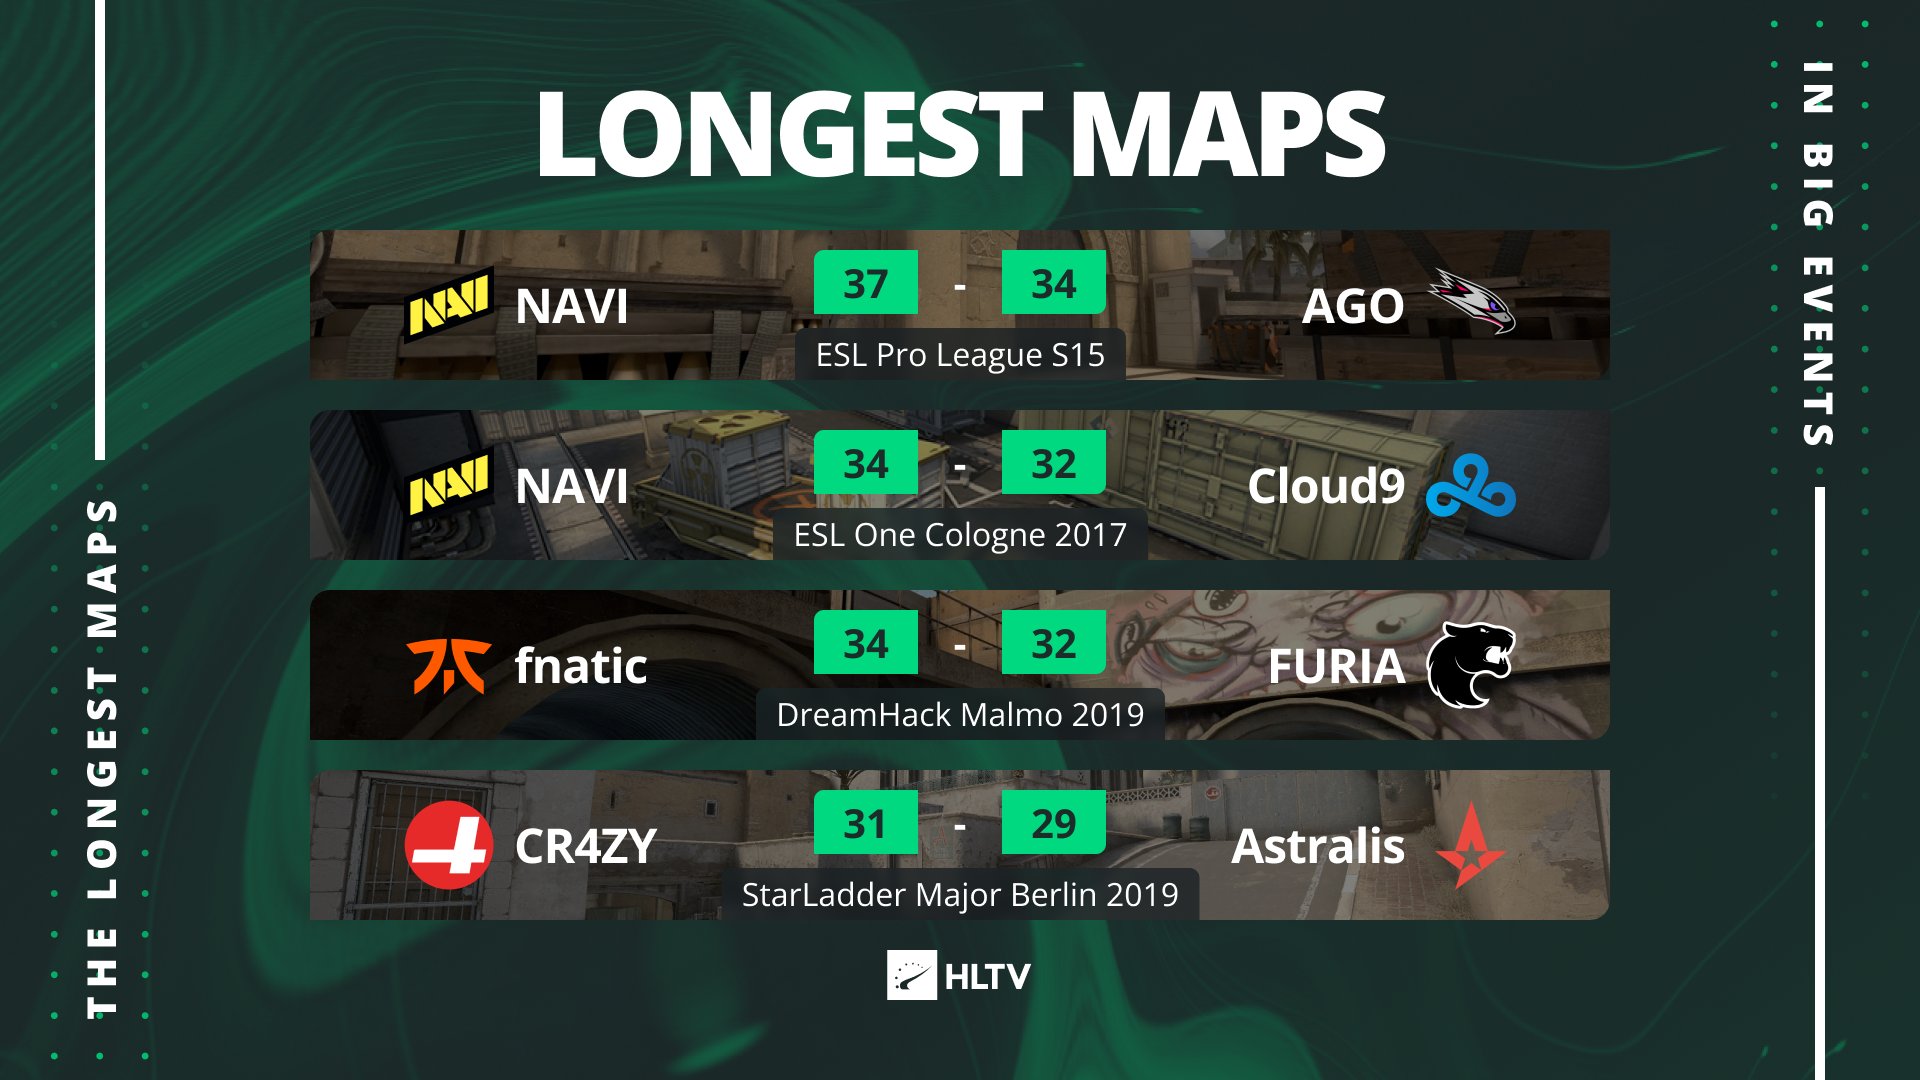 NaVi Beat AGO in One of The Longest, Recording-Breaking Maps